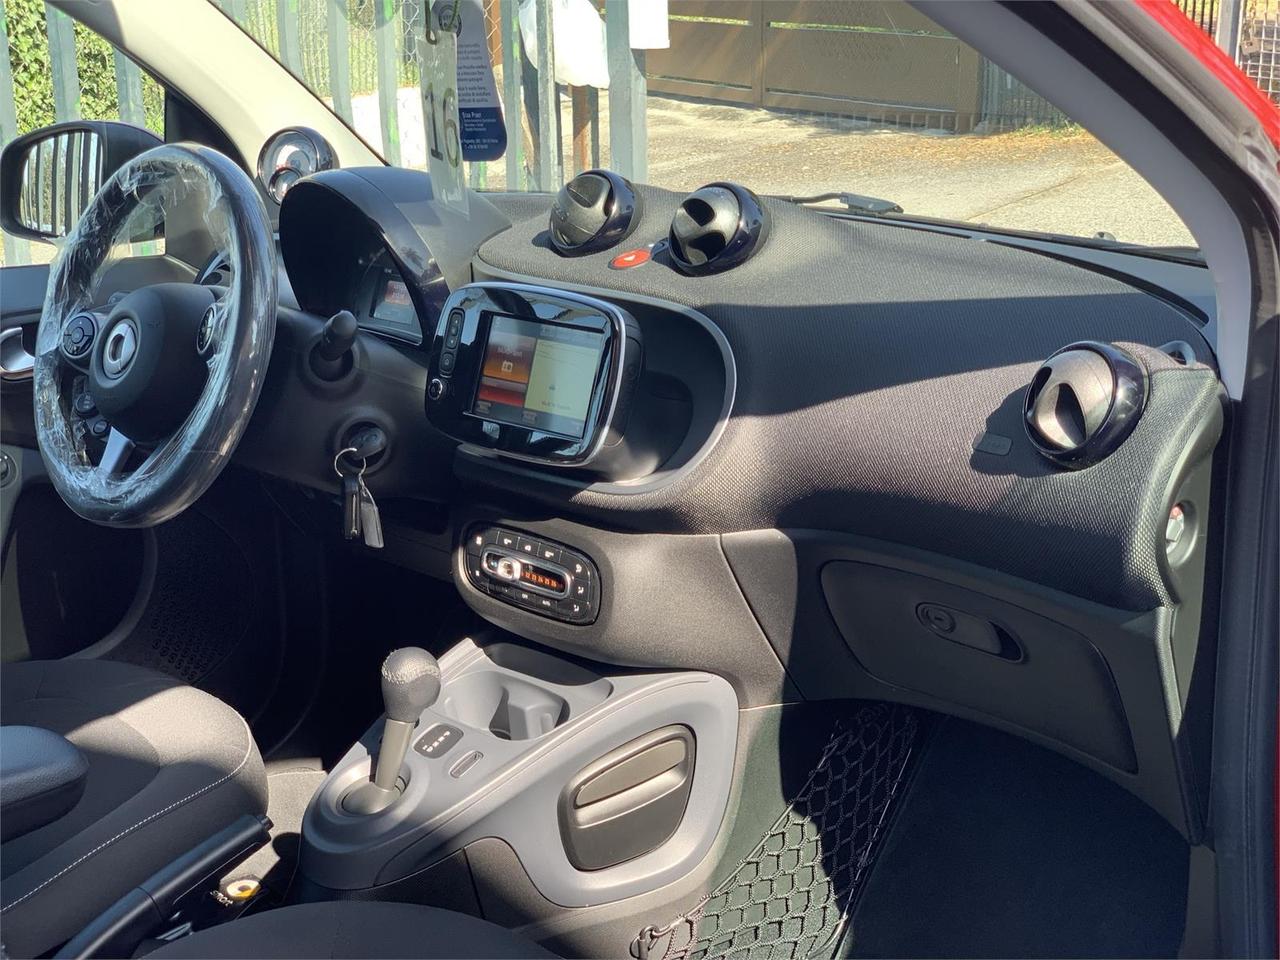 SMART fortwo fortwo 70 1.0 Superpassion